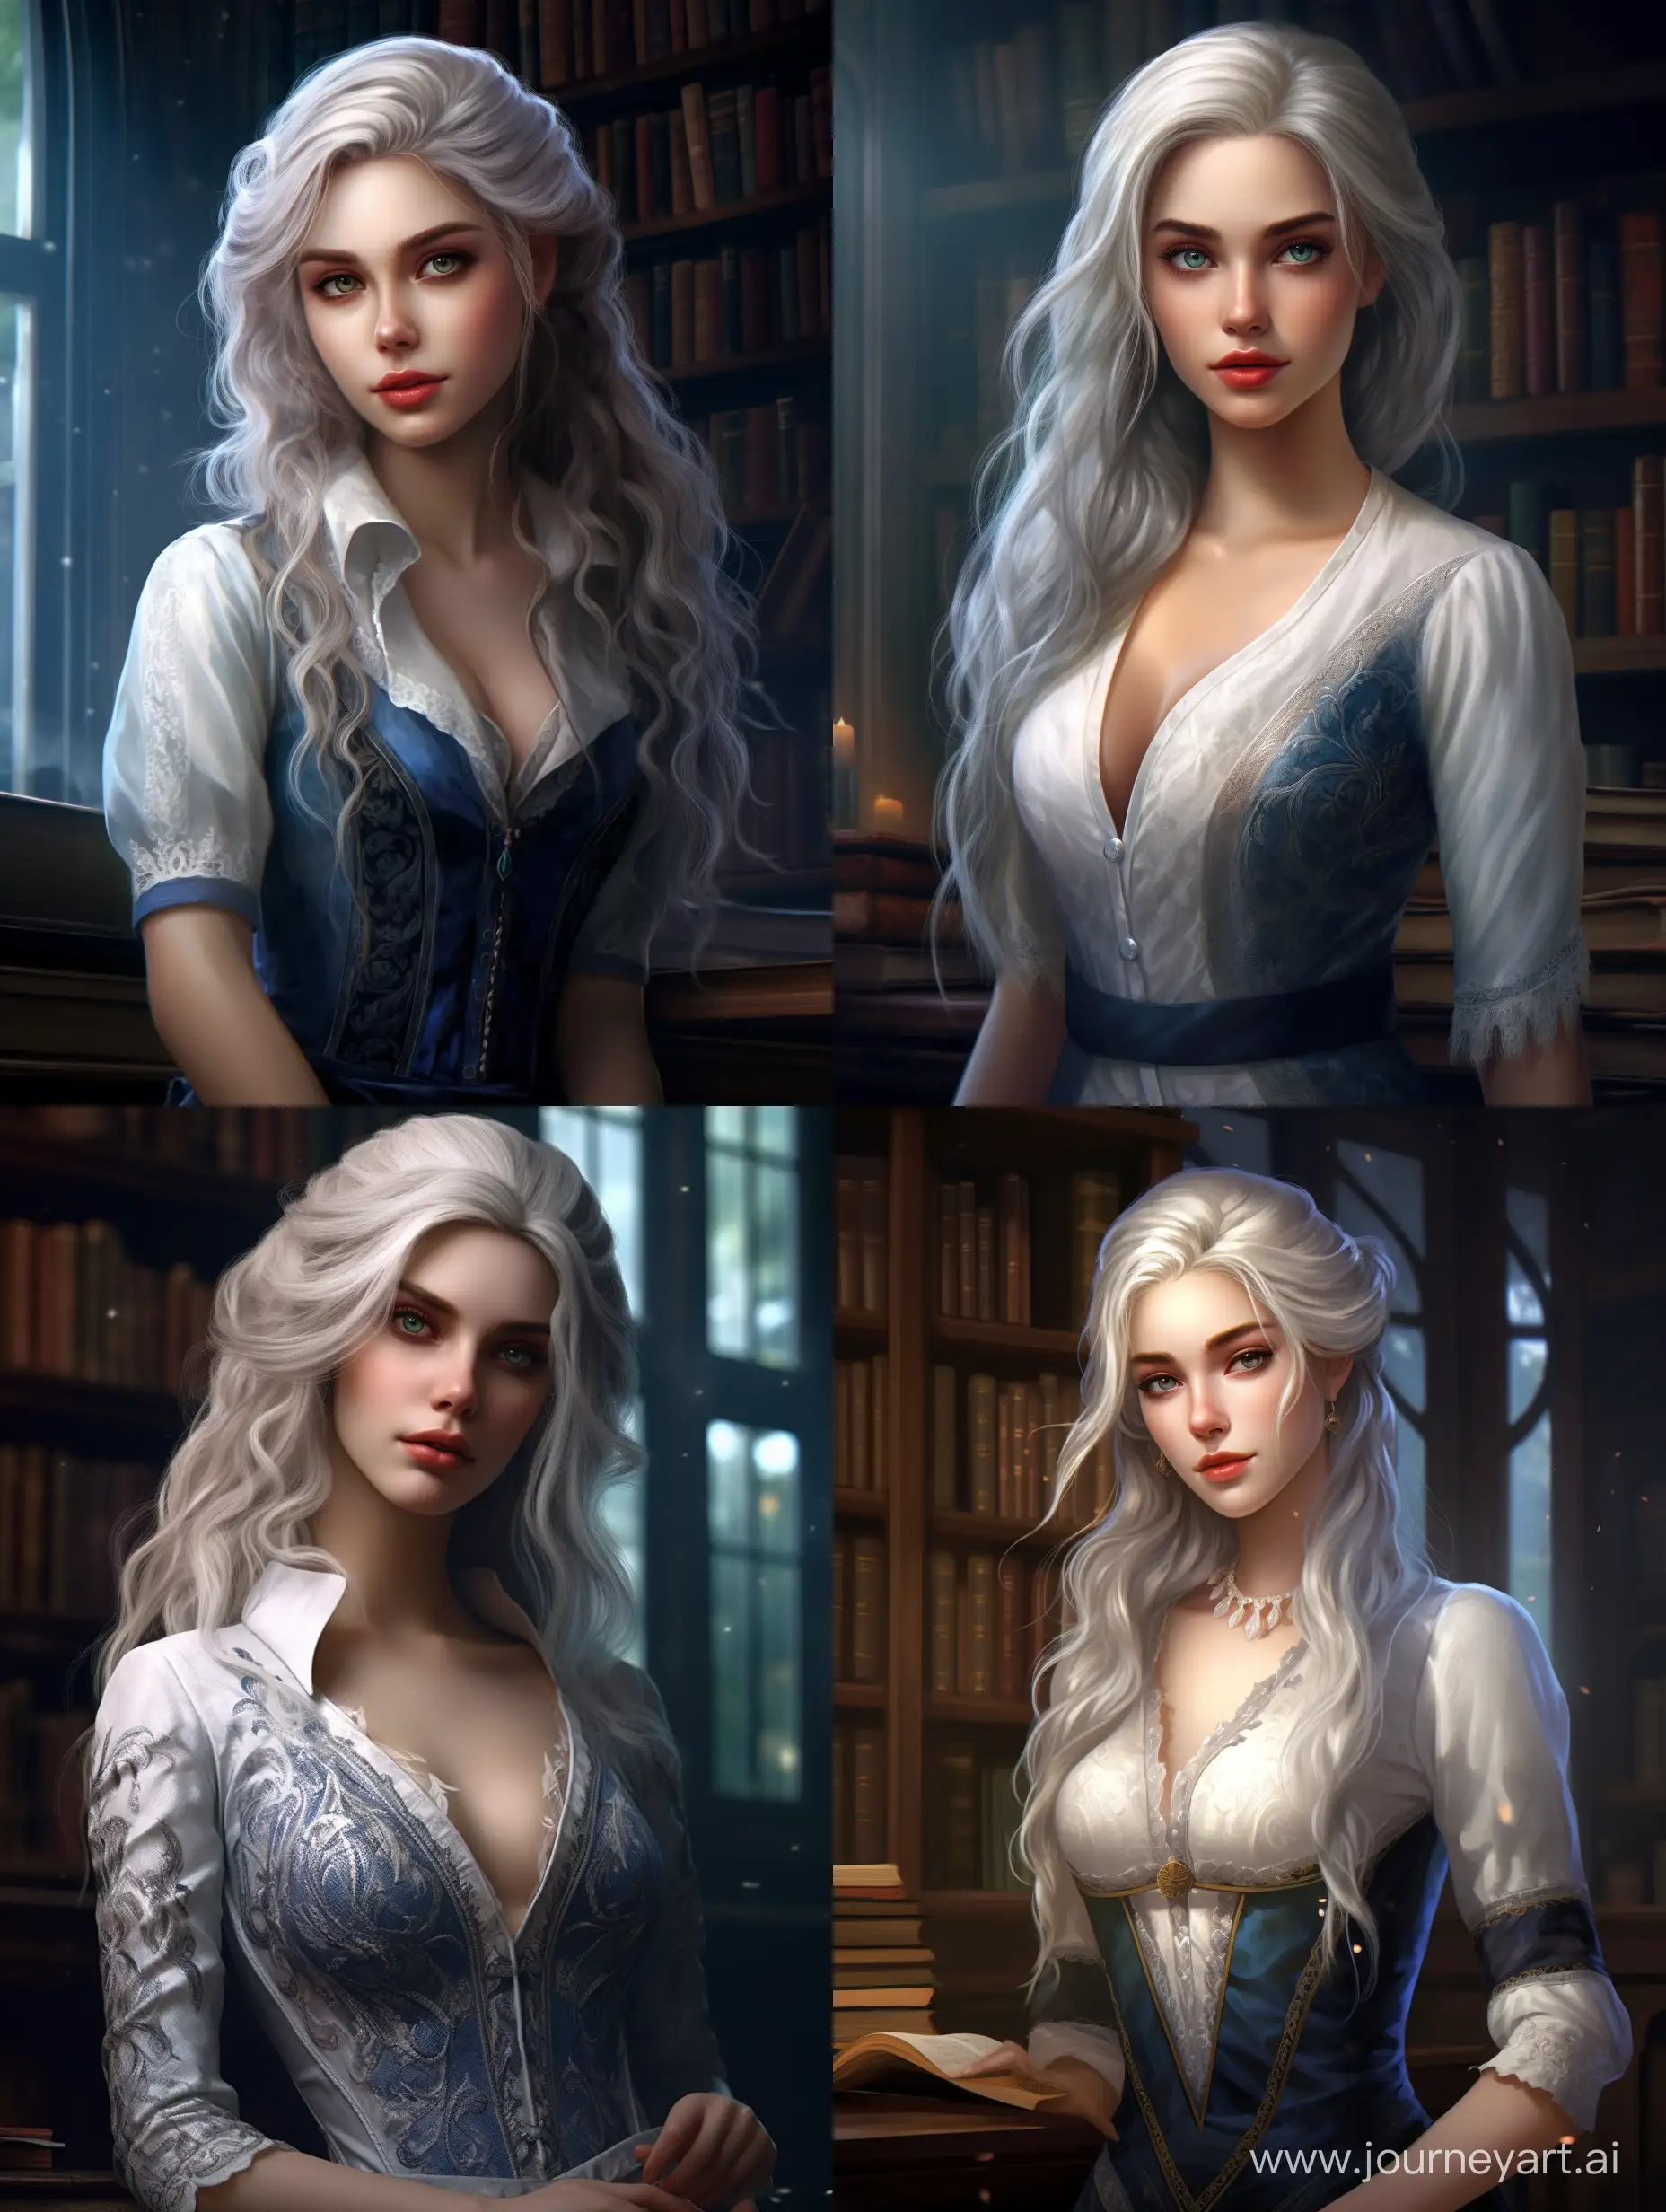 young woman elf, white hair, noble fantasy librarian clothing blue and white clothing, library background, portrait